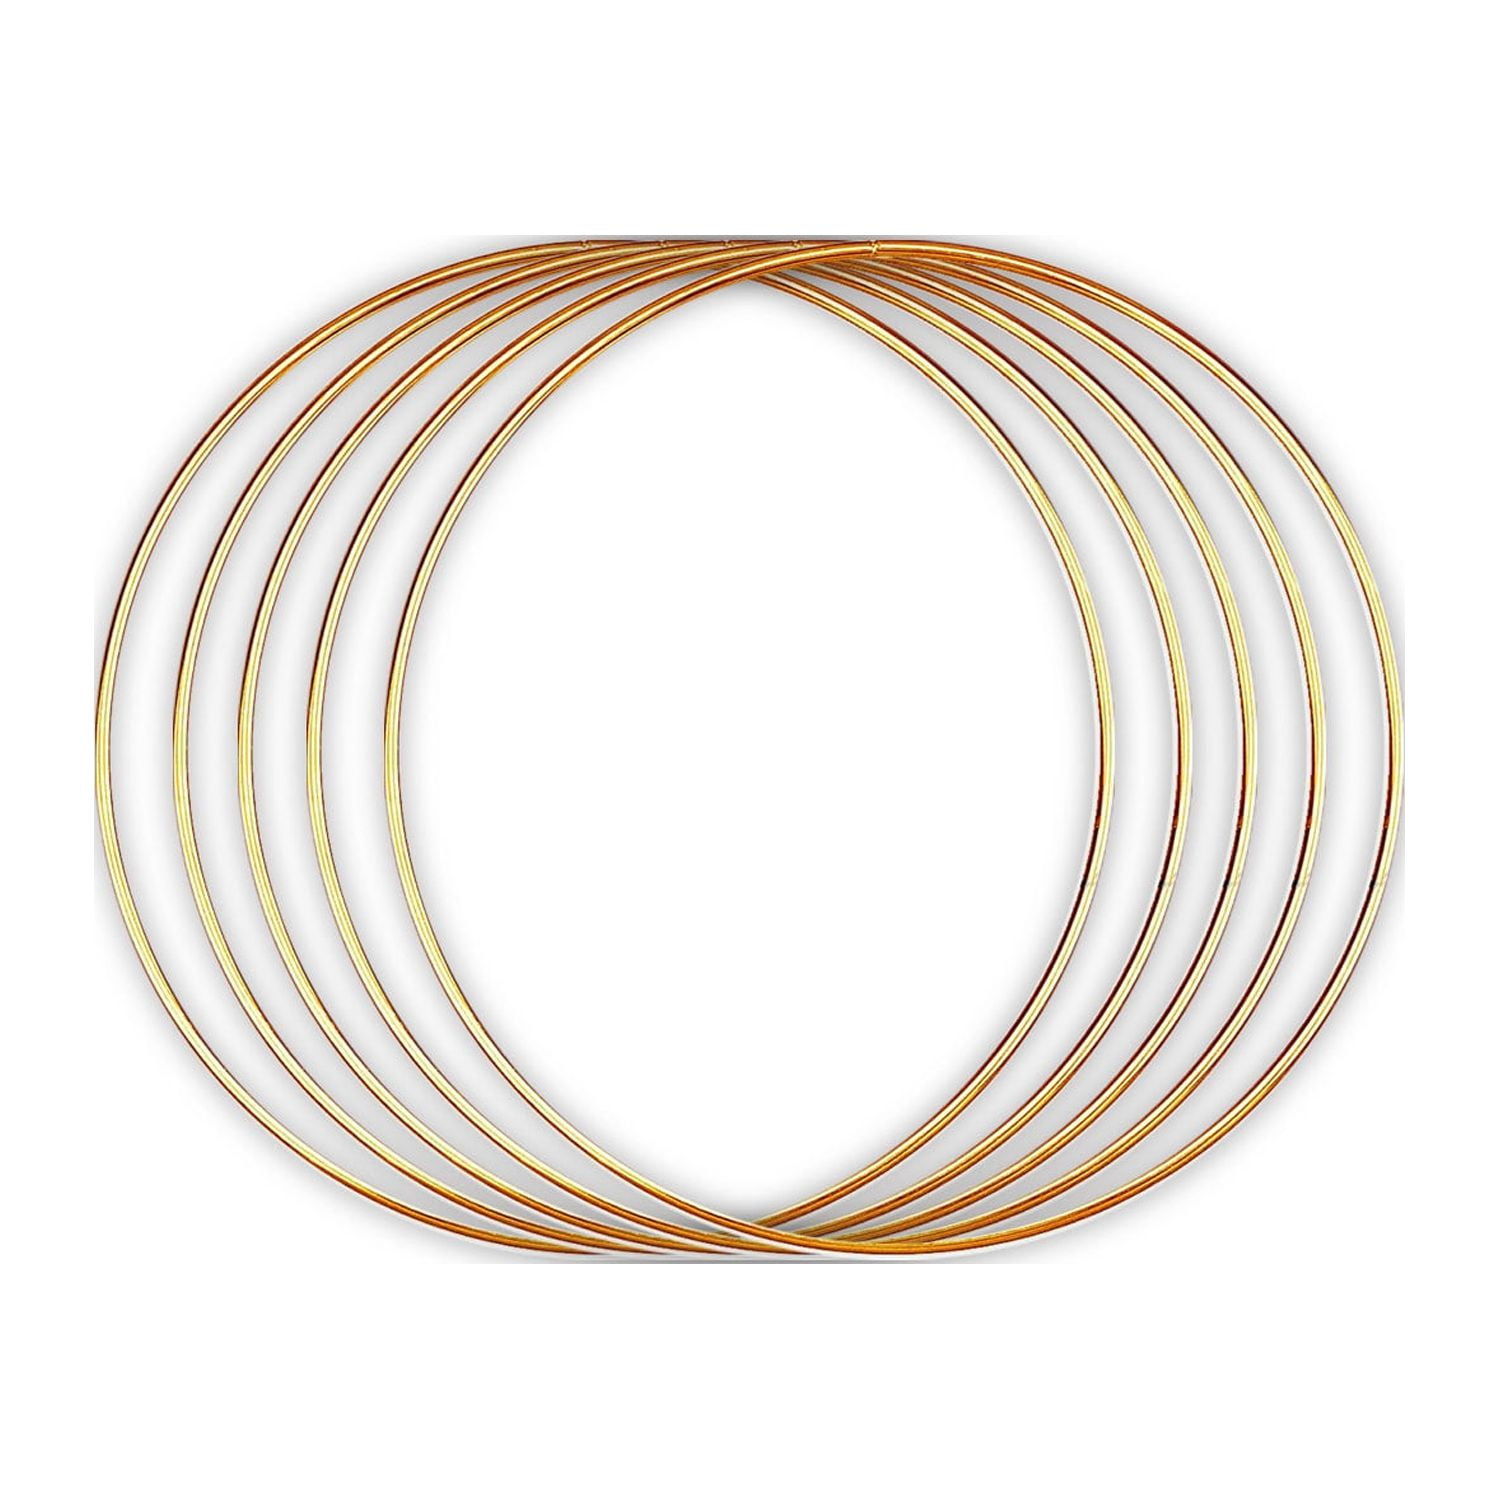 10 Piece Metal Hoops, Metal Rings for Crafting Dream Catchers, and Other  Crafts. 2-inch, 3-inch, 4-inch, 5-inch, 6-inch (Gold)